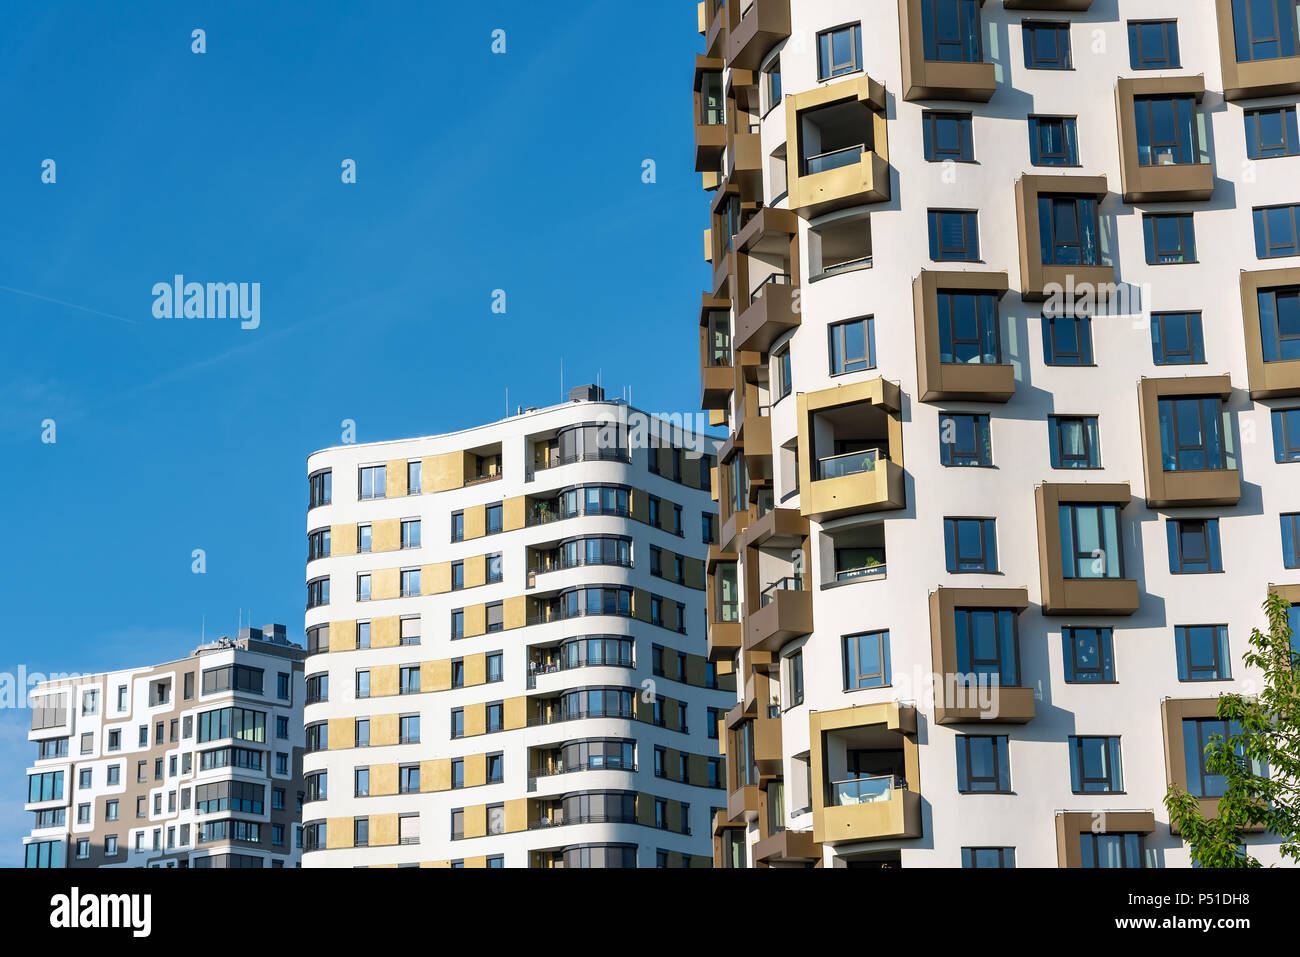 Detail of some multi-storey apartment buildings seen in Munich, Germany Stock Photo